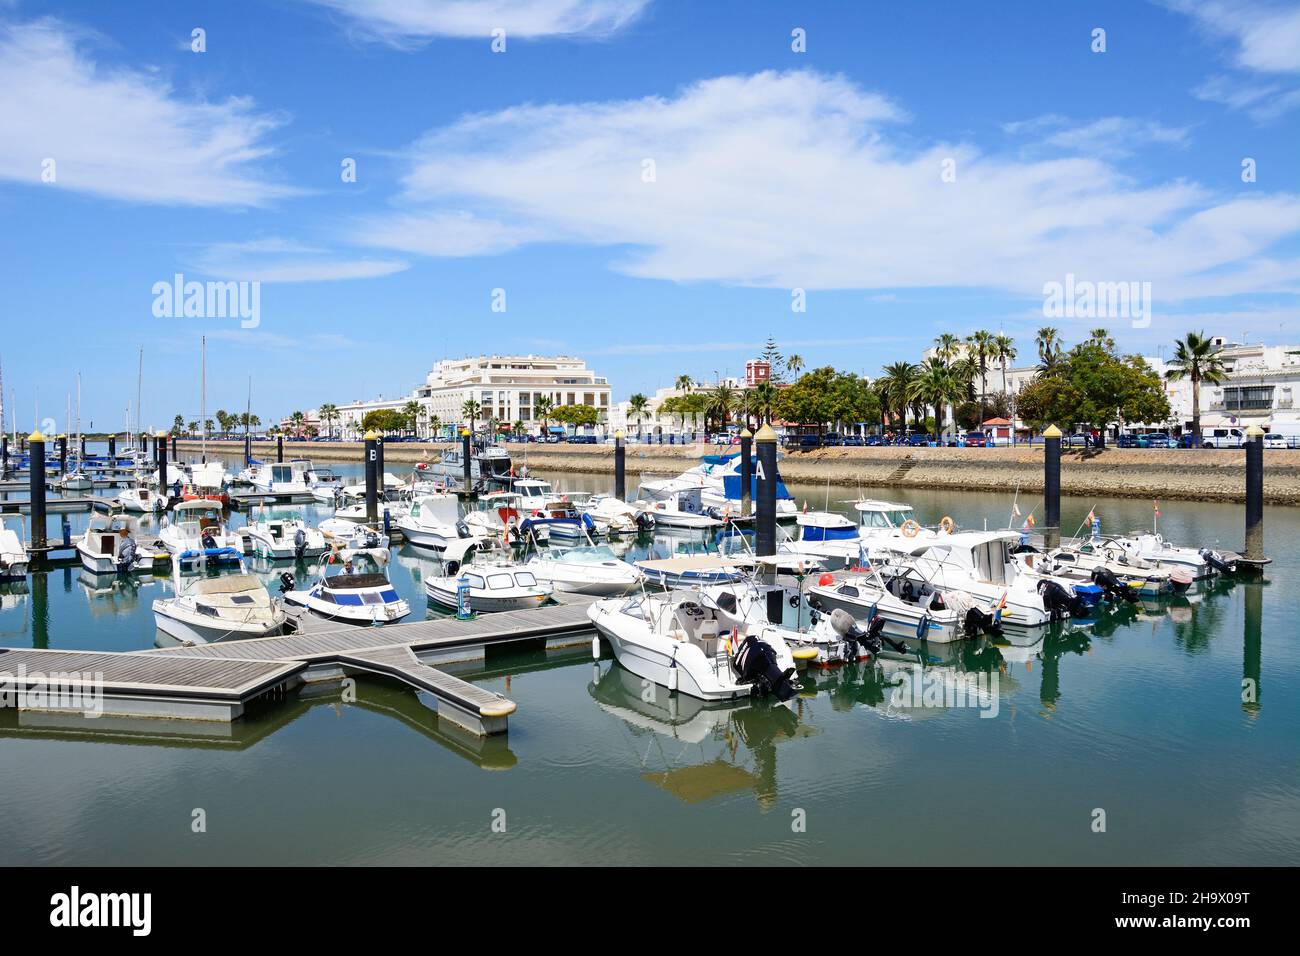 Motor boats moored in the marina (Puerto Ayamonte) with town buildings to the rear, Ayamonte, Huelva Province, Andalucia, Spain, Europe. Stock Photo